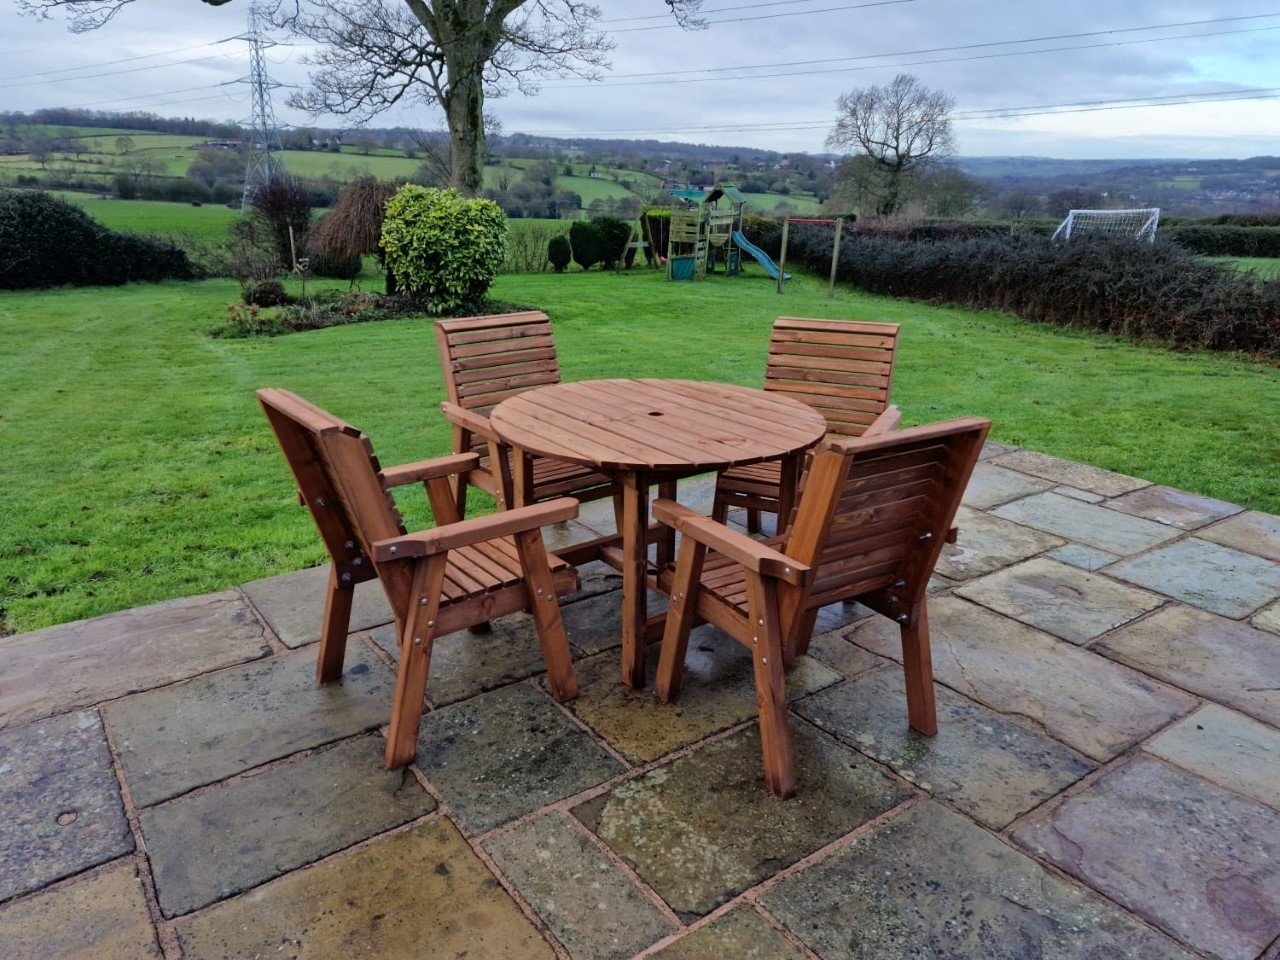 Harrogate Round Table and 4 Chairs